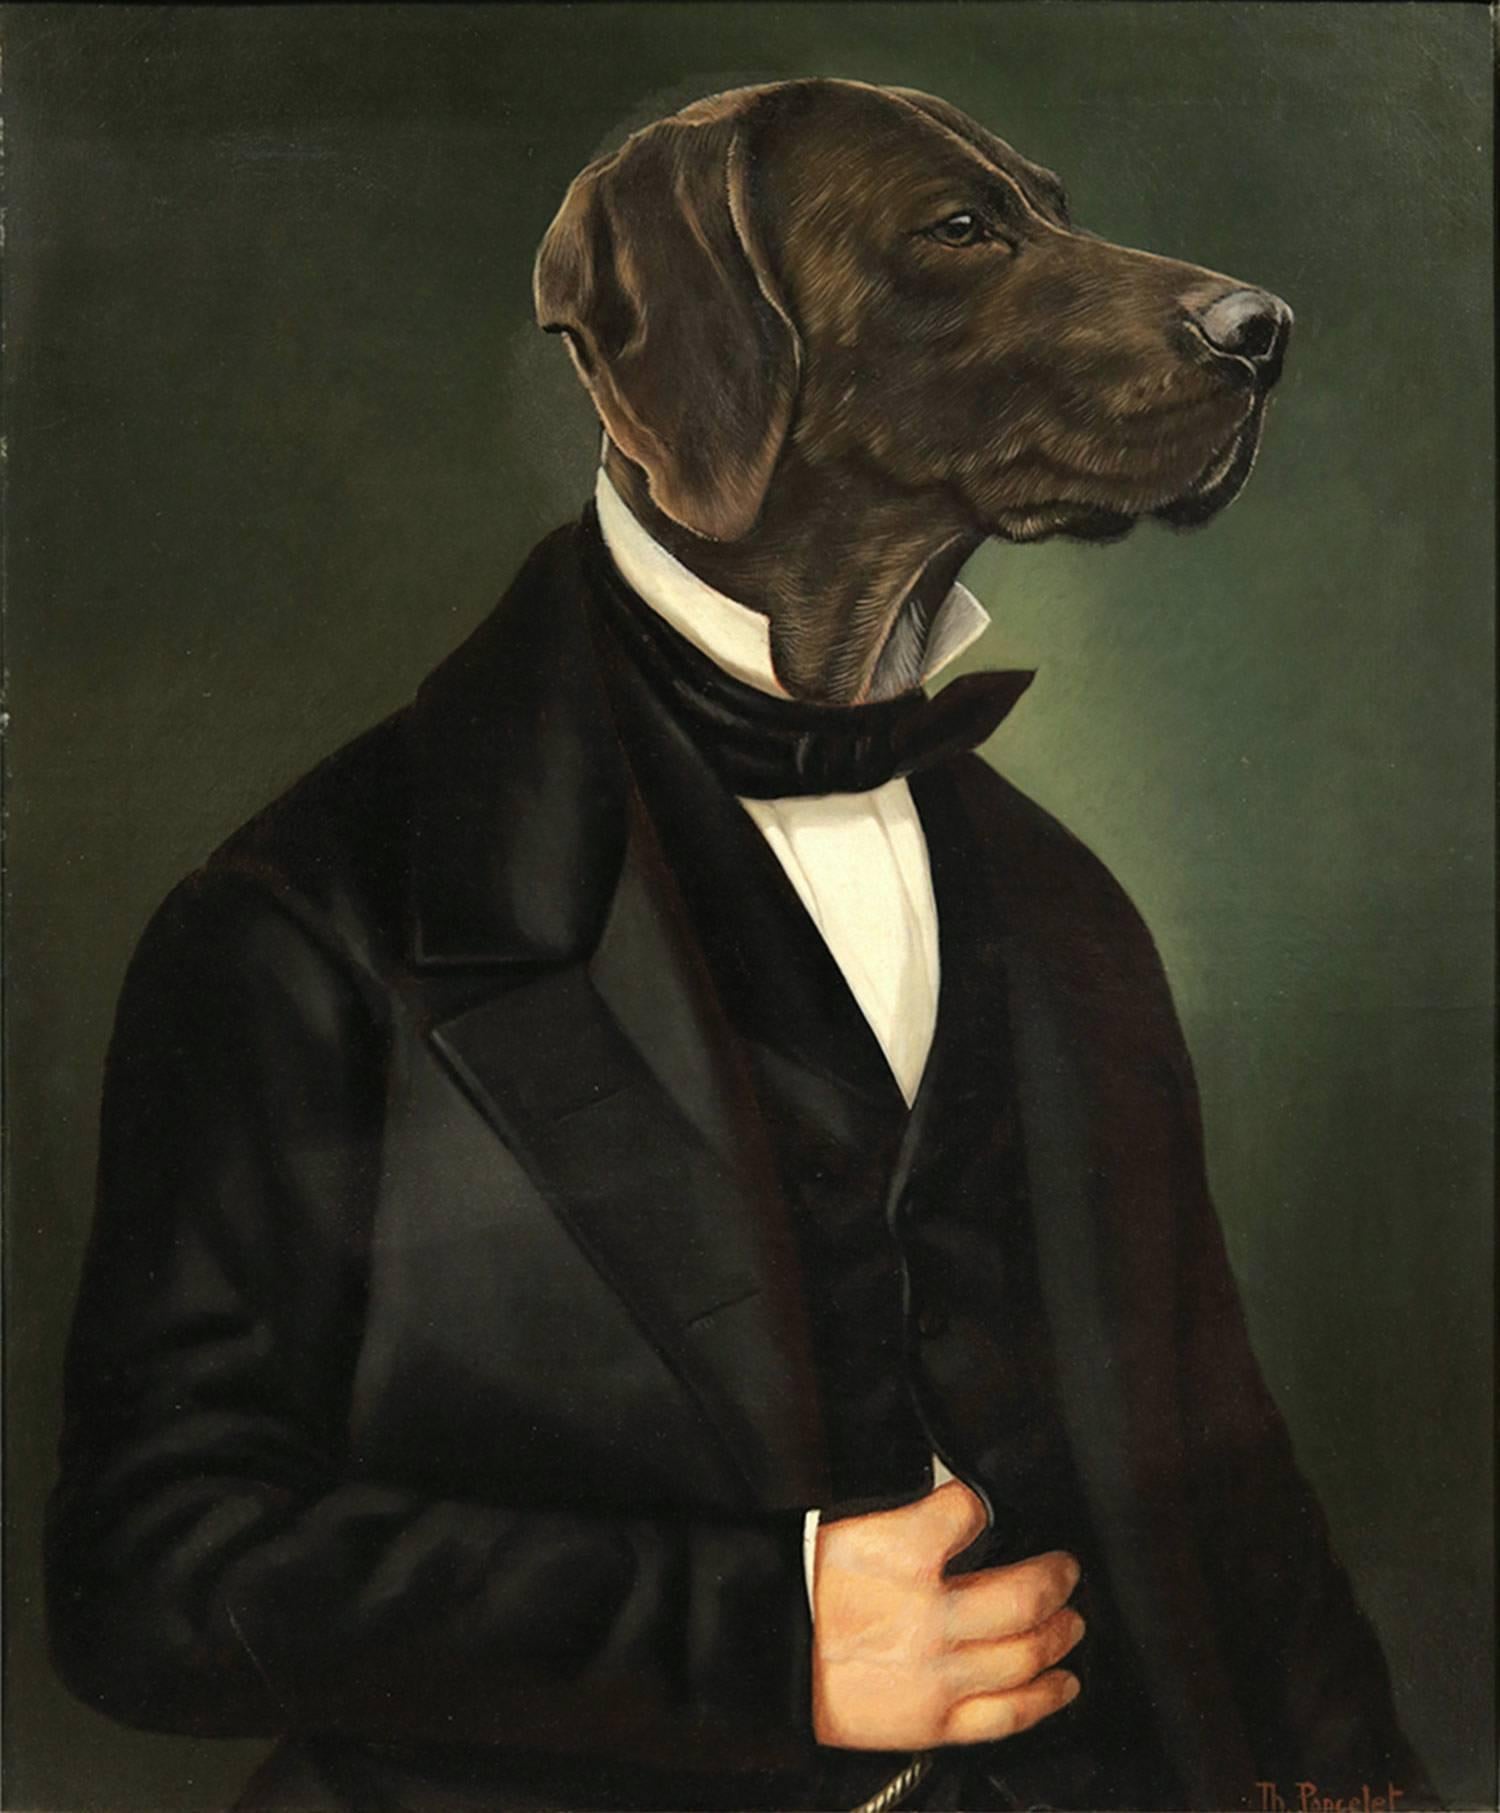 The Gentleman Labrador - Painting by Thierry Poncelet